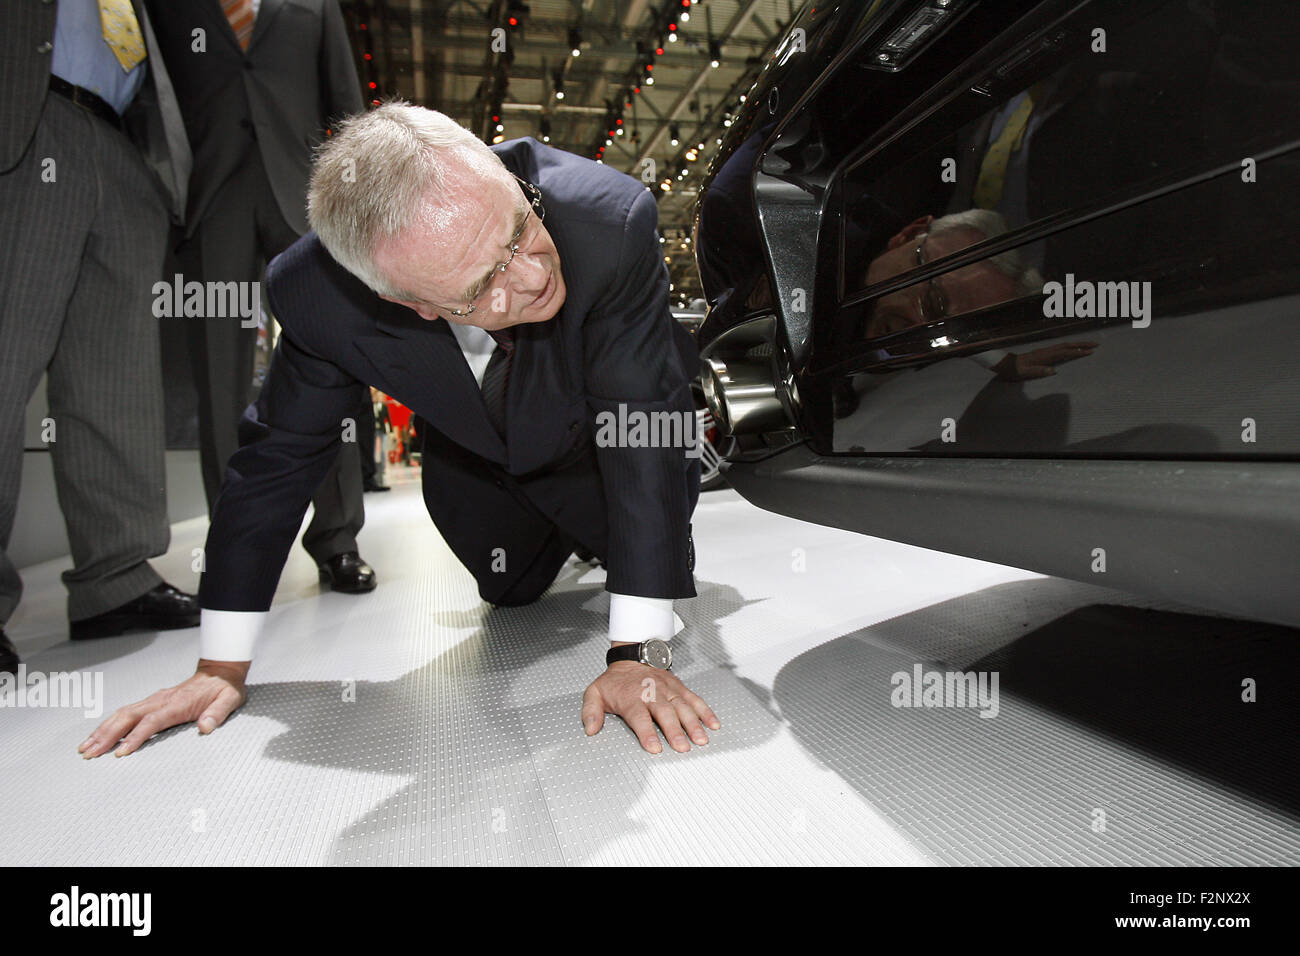 Geneva, Switzerland. 04th Mar, 2008. FILE - A file picture made available on 22 September 2015 shows Volkswagen AG CEO Martin Winterkorn as he checks the bottom side of a Porsche GT2 during a tour on the first media day of the 78th Geneva International Motor Show in Geneva, Switzerland, 04 March 2008. Photo: MARIJAN MURAT/dpa/Alamy Live News Stock Photo